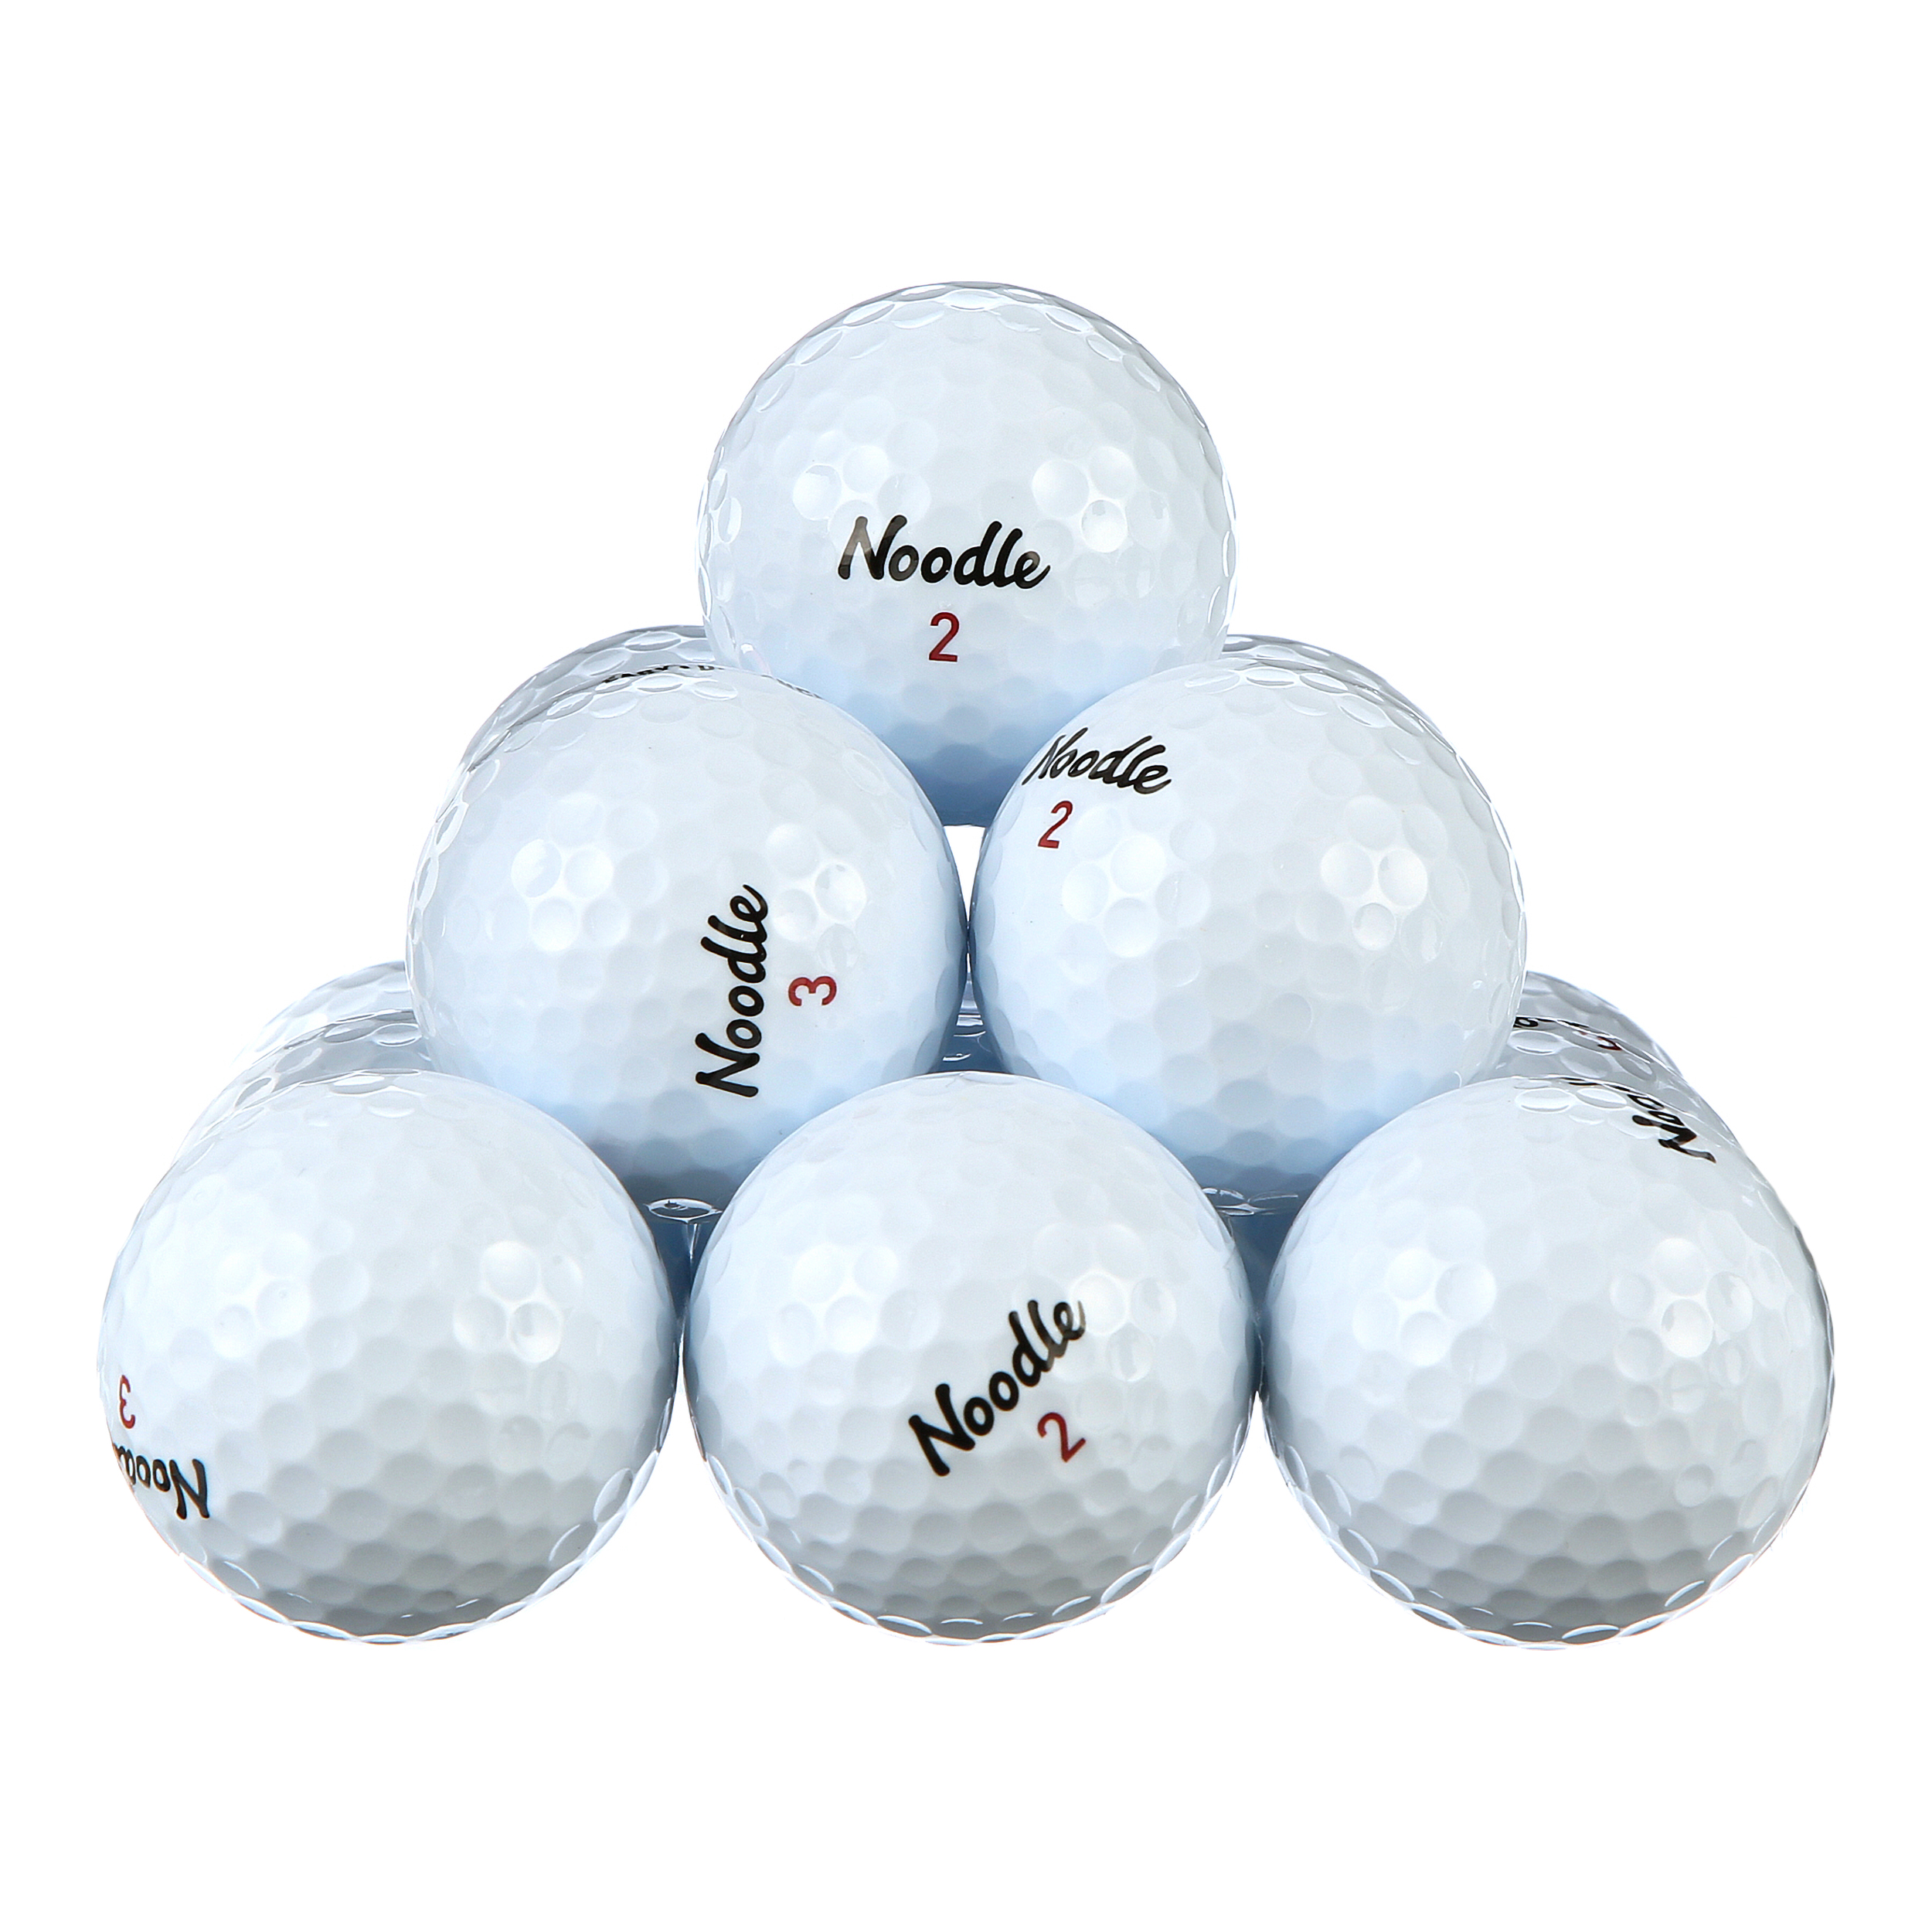 TaylorMade Noodle Easy Distance Golf Balls, 30 Pack - image 4 of 5